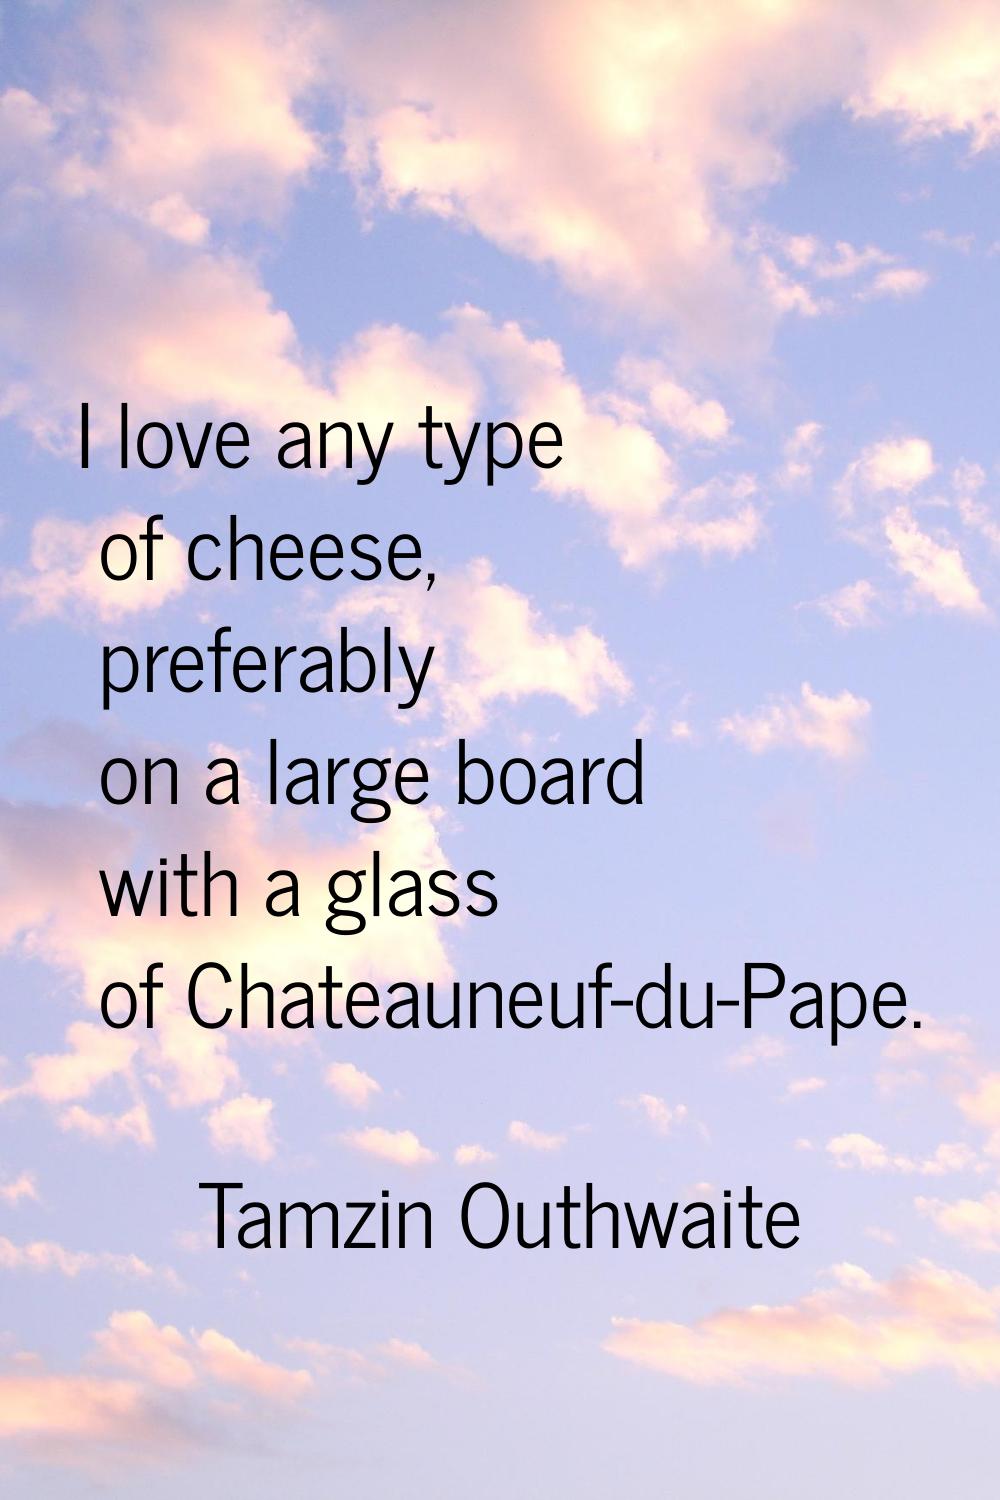 I love any type of cheese, preferably on a large board with a glass of Chateauneuf-du-Pape.